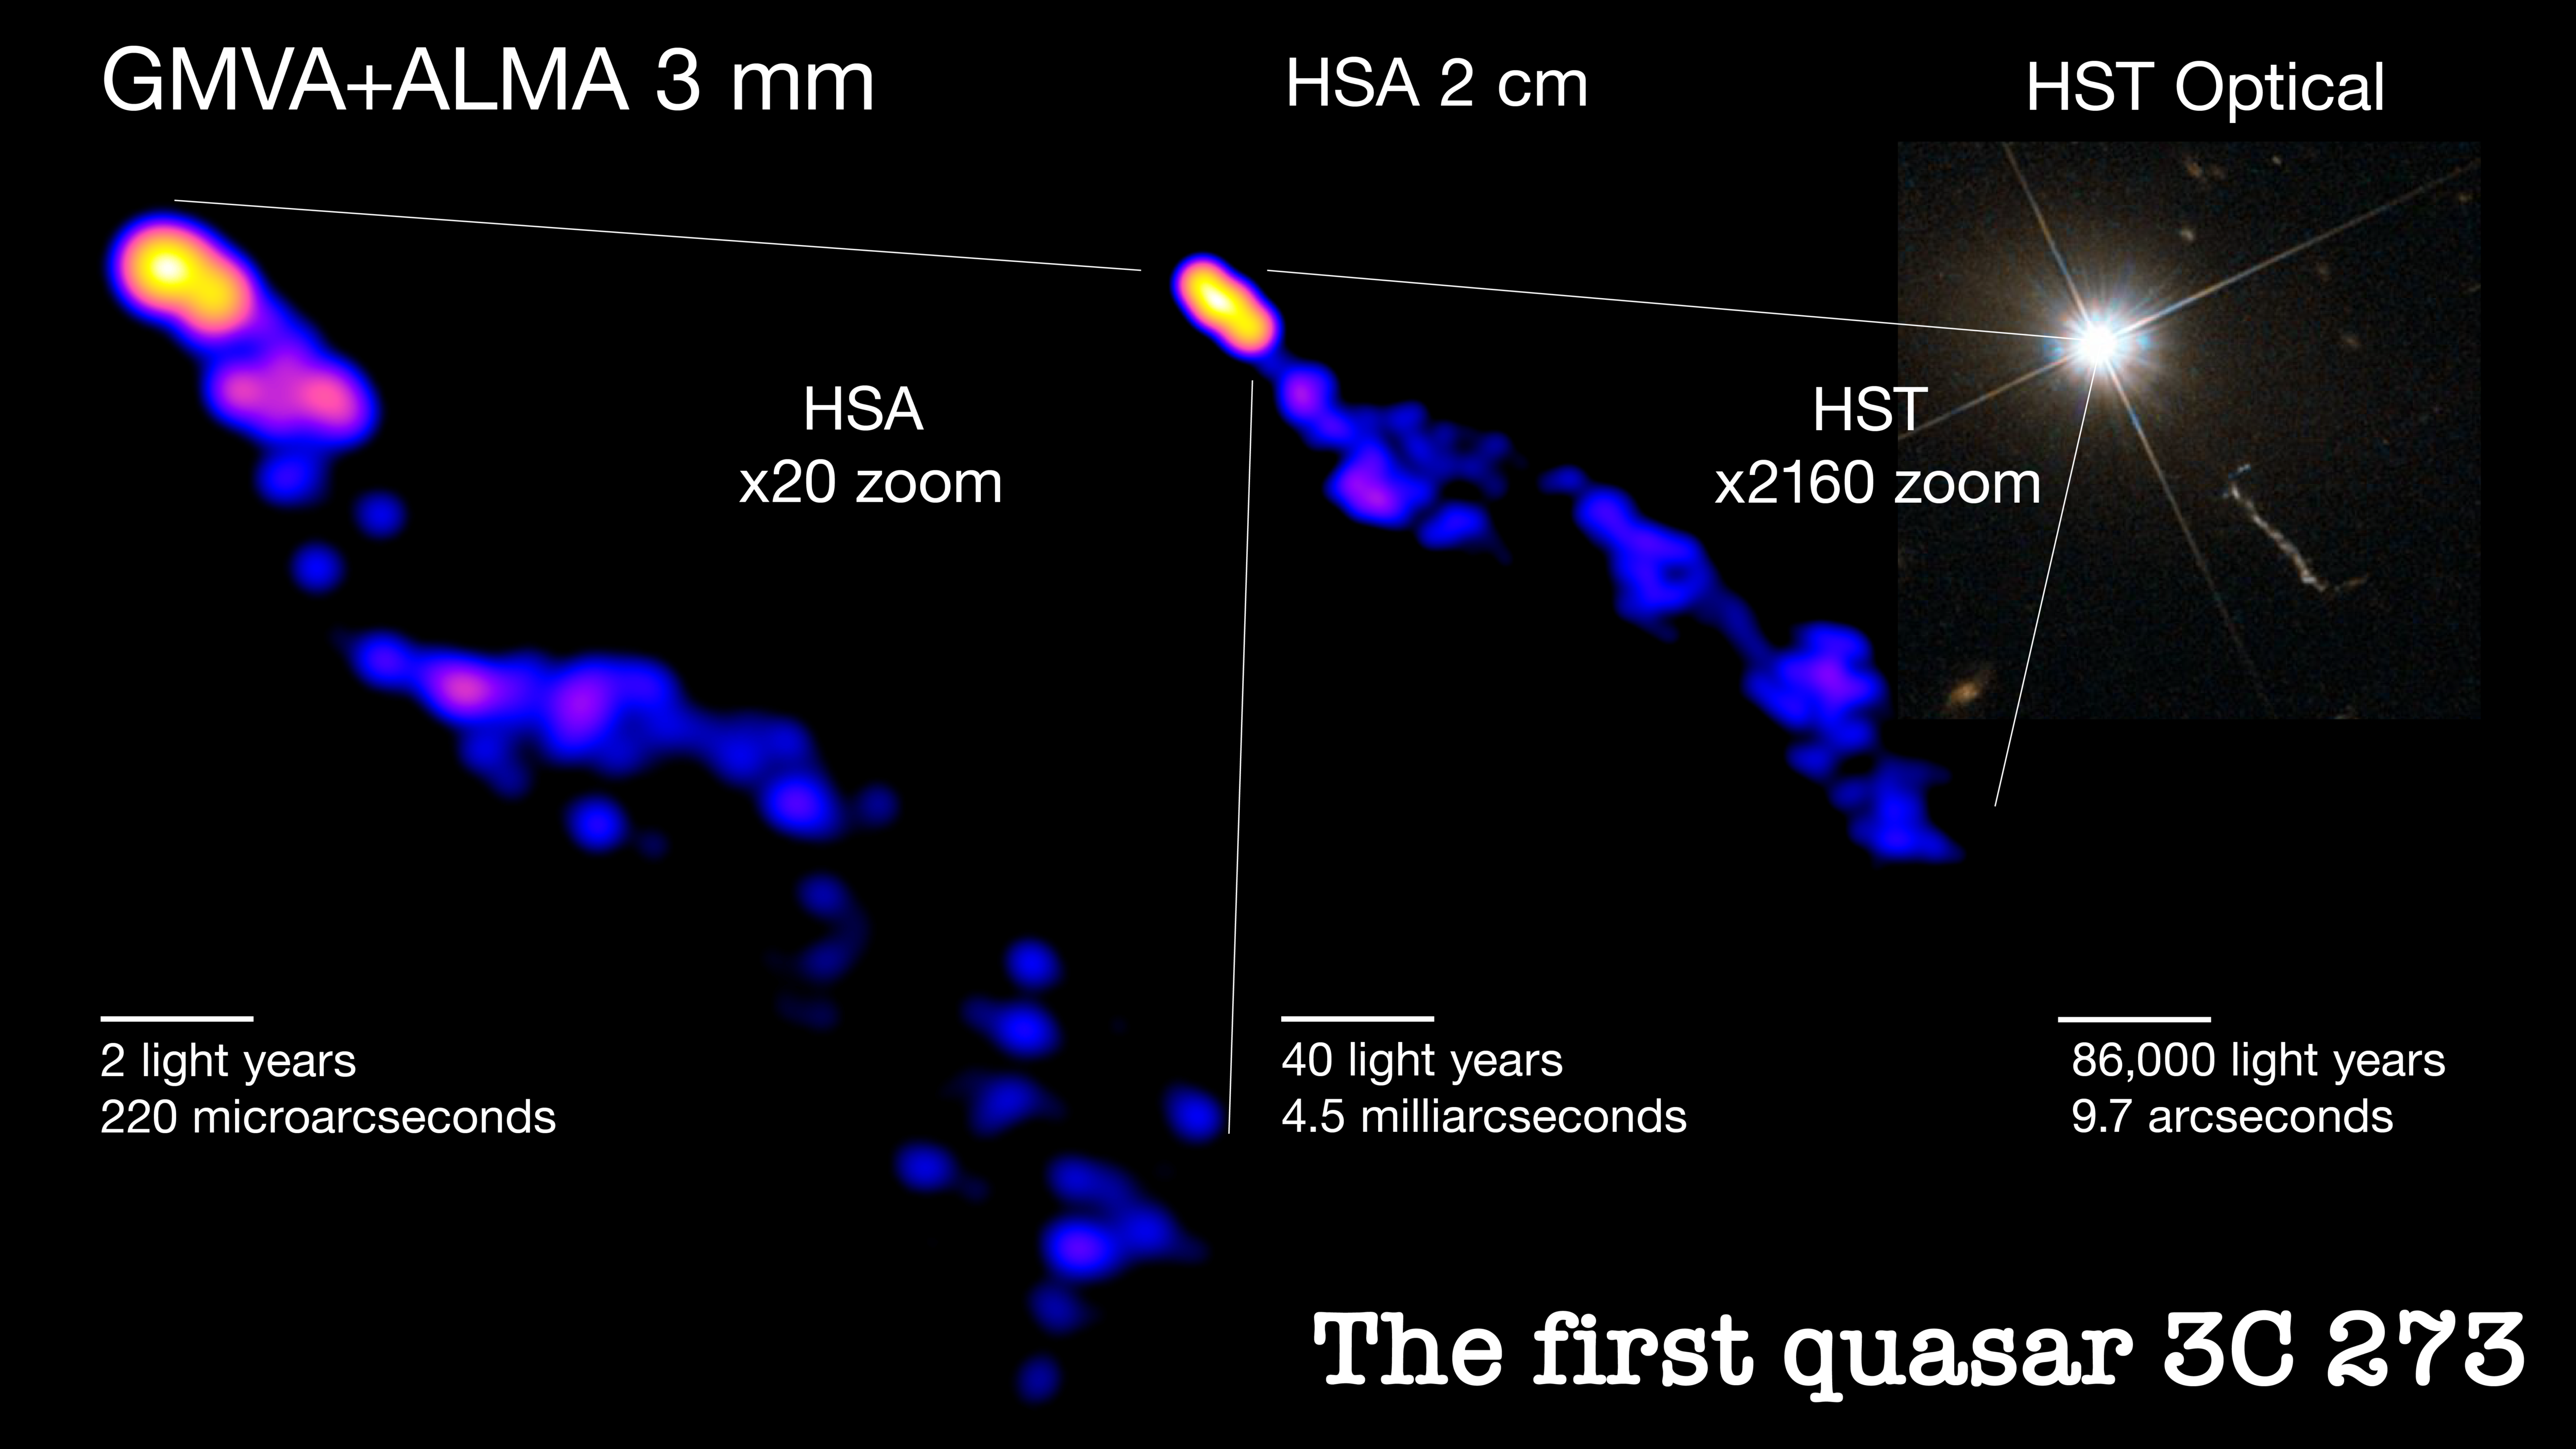 The left image shows the deepest look yet into the plasma jet of the quasar 3C 273, which will allow scientists to further study how quasar jets are collimated, or narrowed. The powerful, collimated jet extends for hundreds of thousands of light-years beyond the host galaxy, as seen in the right panel image taken by the Hubble Space Telescope. Scientists use radio images at different scales to measure the shape of the entire jet. The arrays used are the Global Millimeter VLBI Array (GMVA) joined by the Atacama Large Millimeter/submillimeter Array (ALMA) and the High Sensitivity Array (HSA). Credits: Hiroki Okino and Kazunori Akiyama; GMVA+ALMA and HSA images: Okino et al.; HST Image: ESA/Hubble & NASA.